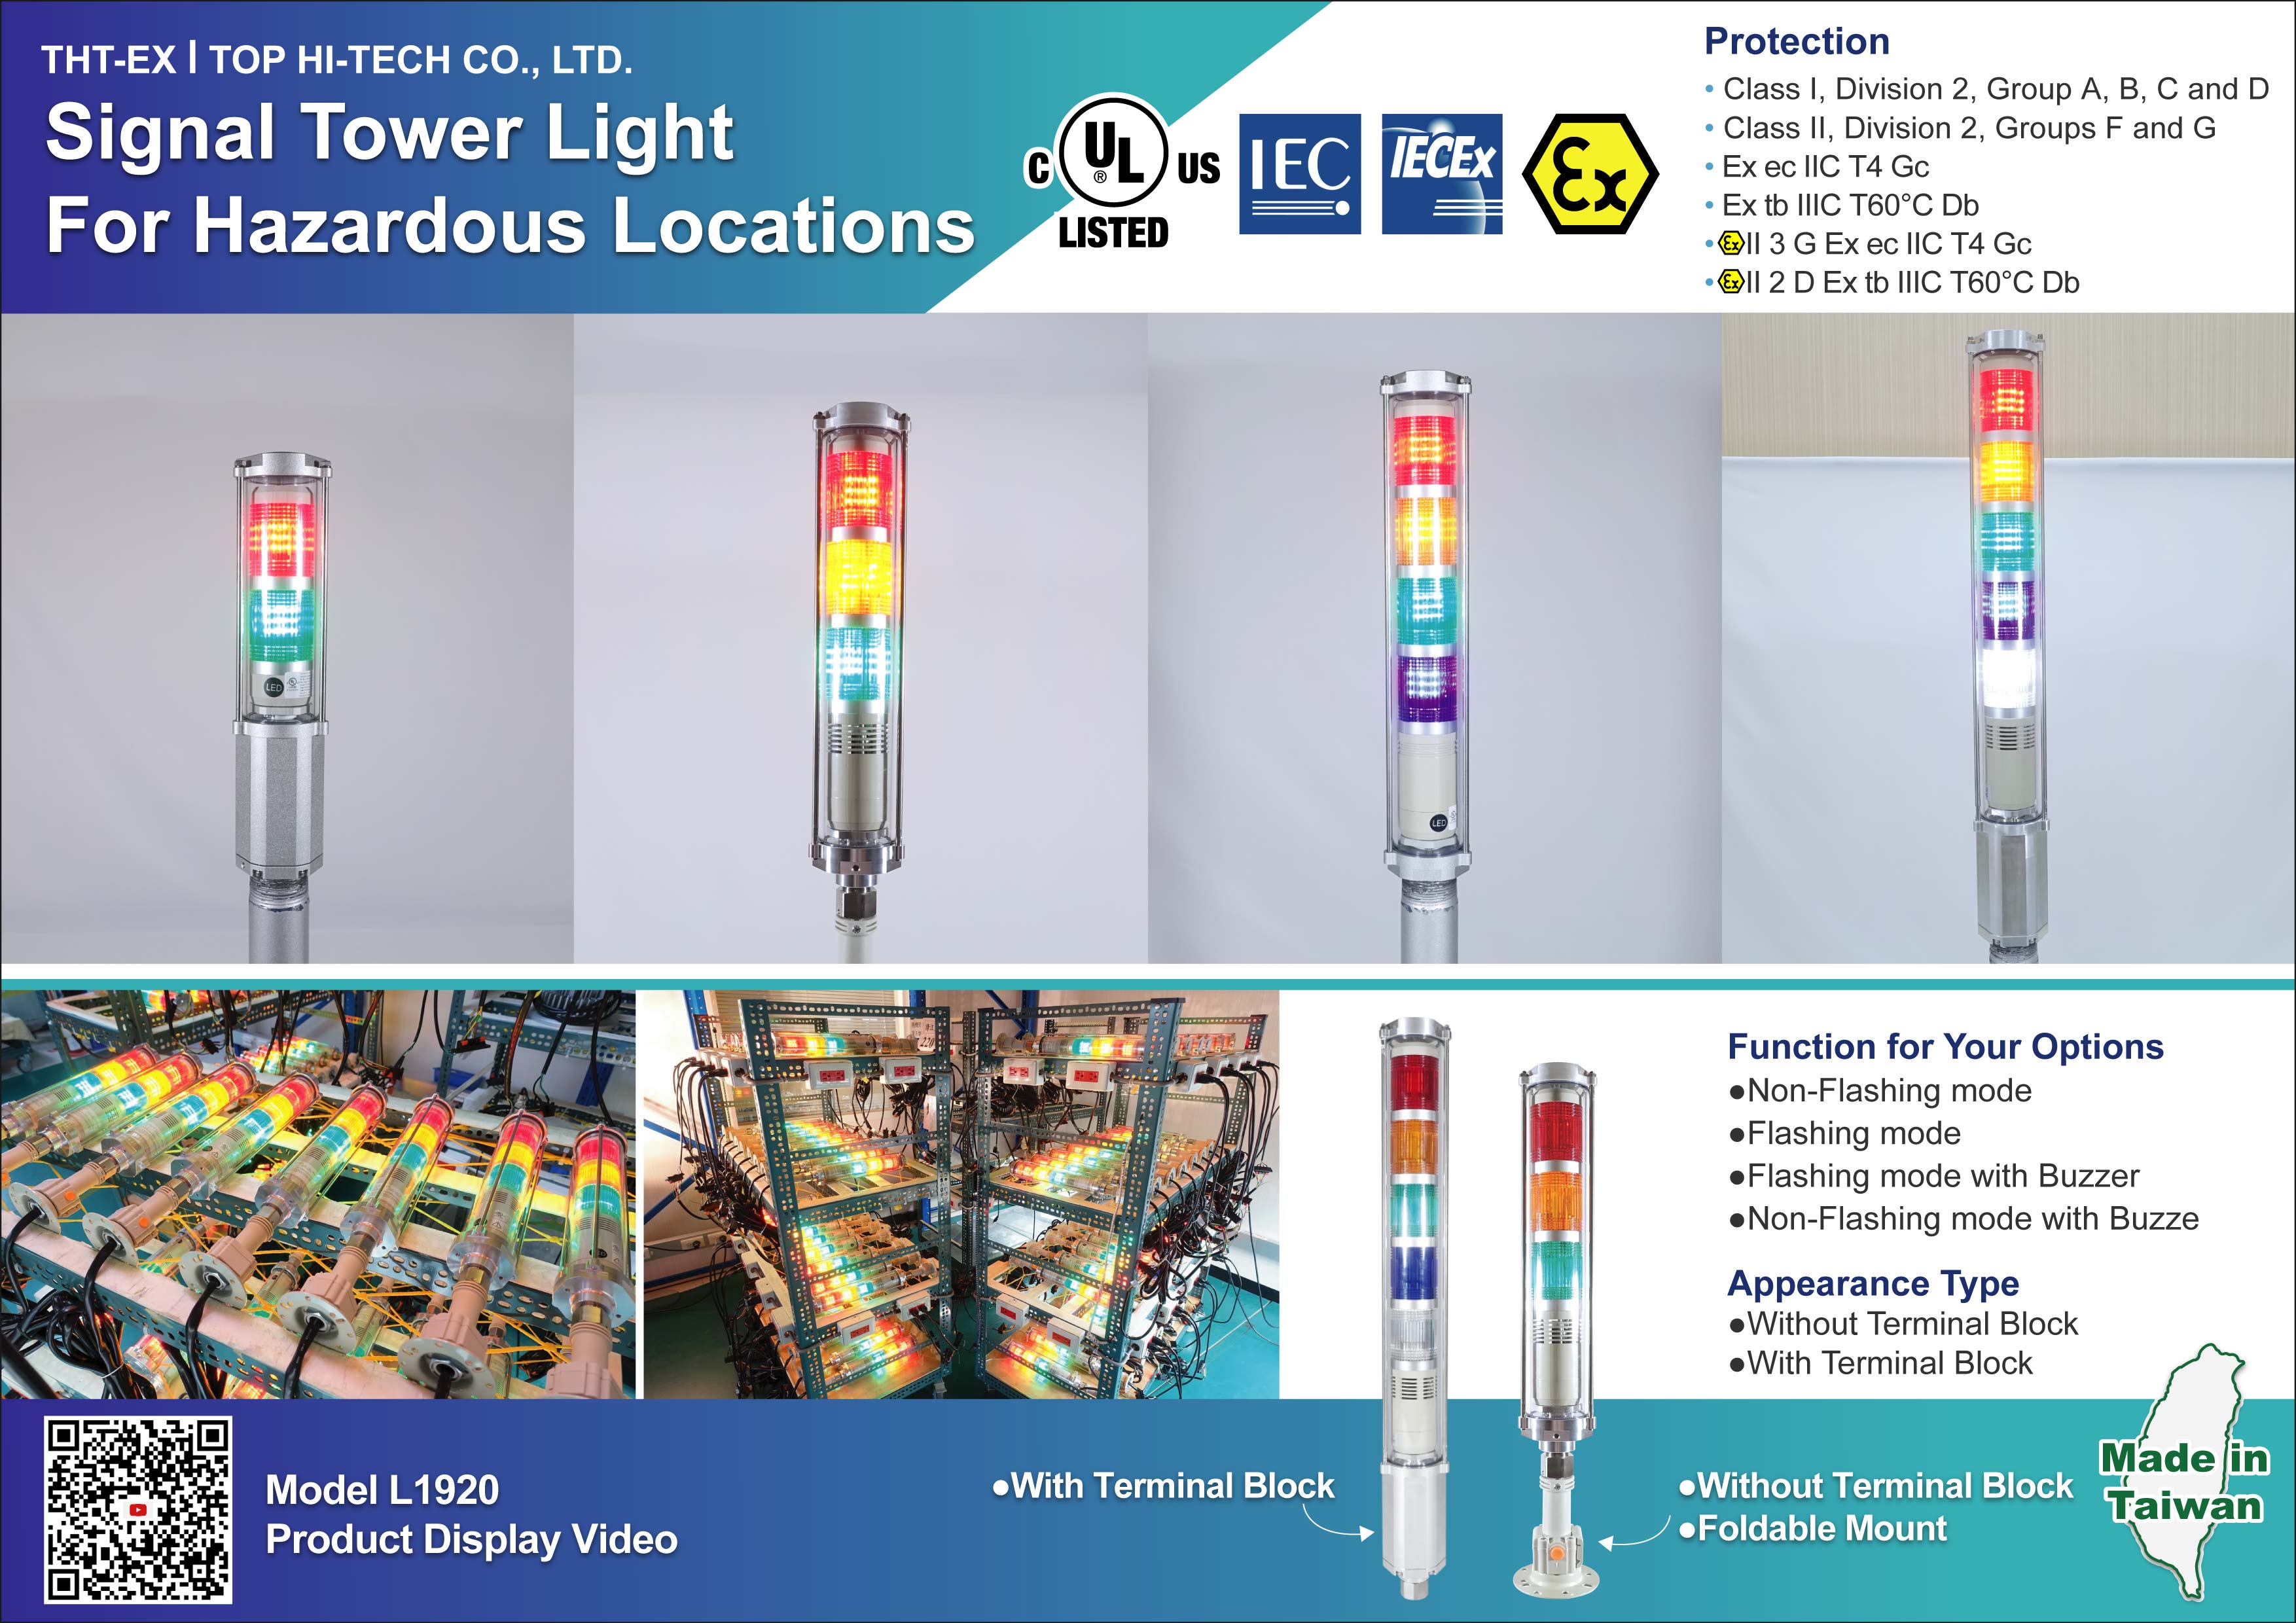 Explosion-proof Signal Tower Light - L1920